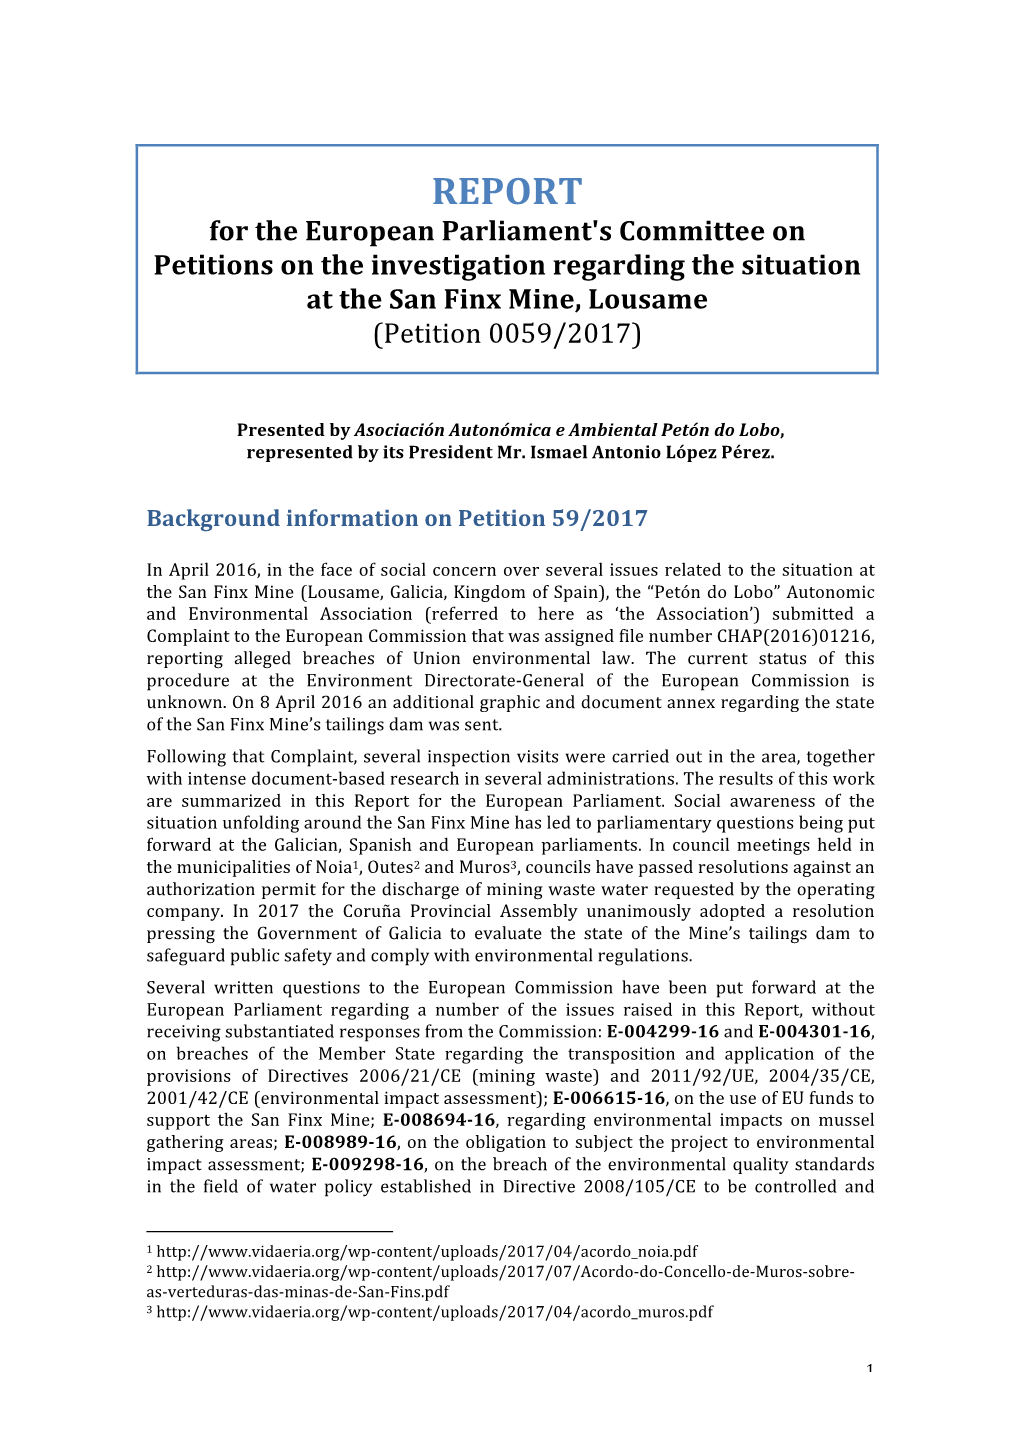 For the European Parliament's Committee on Petitions on the Investigation Regarding the Situation at the San Finx Mine, Lousame (Petition 0059/2017)